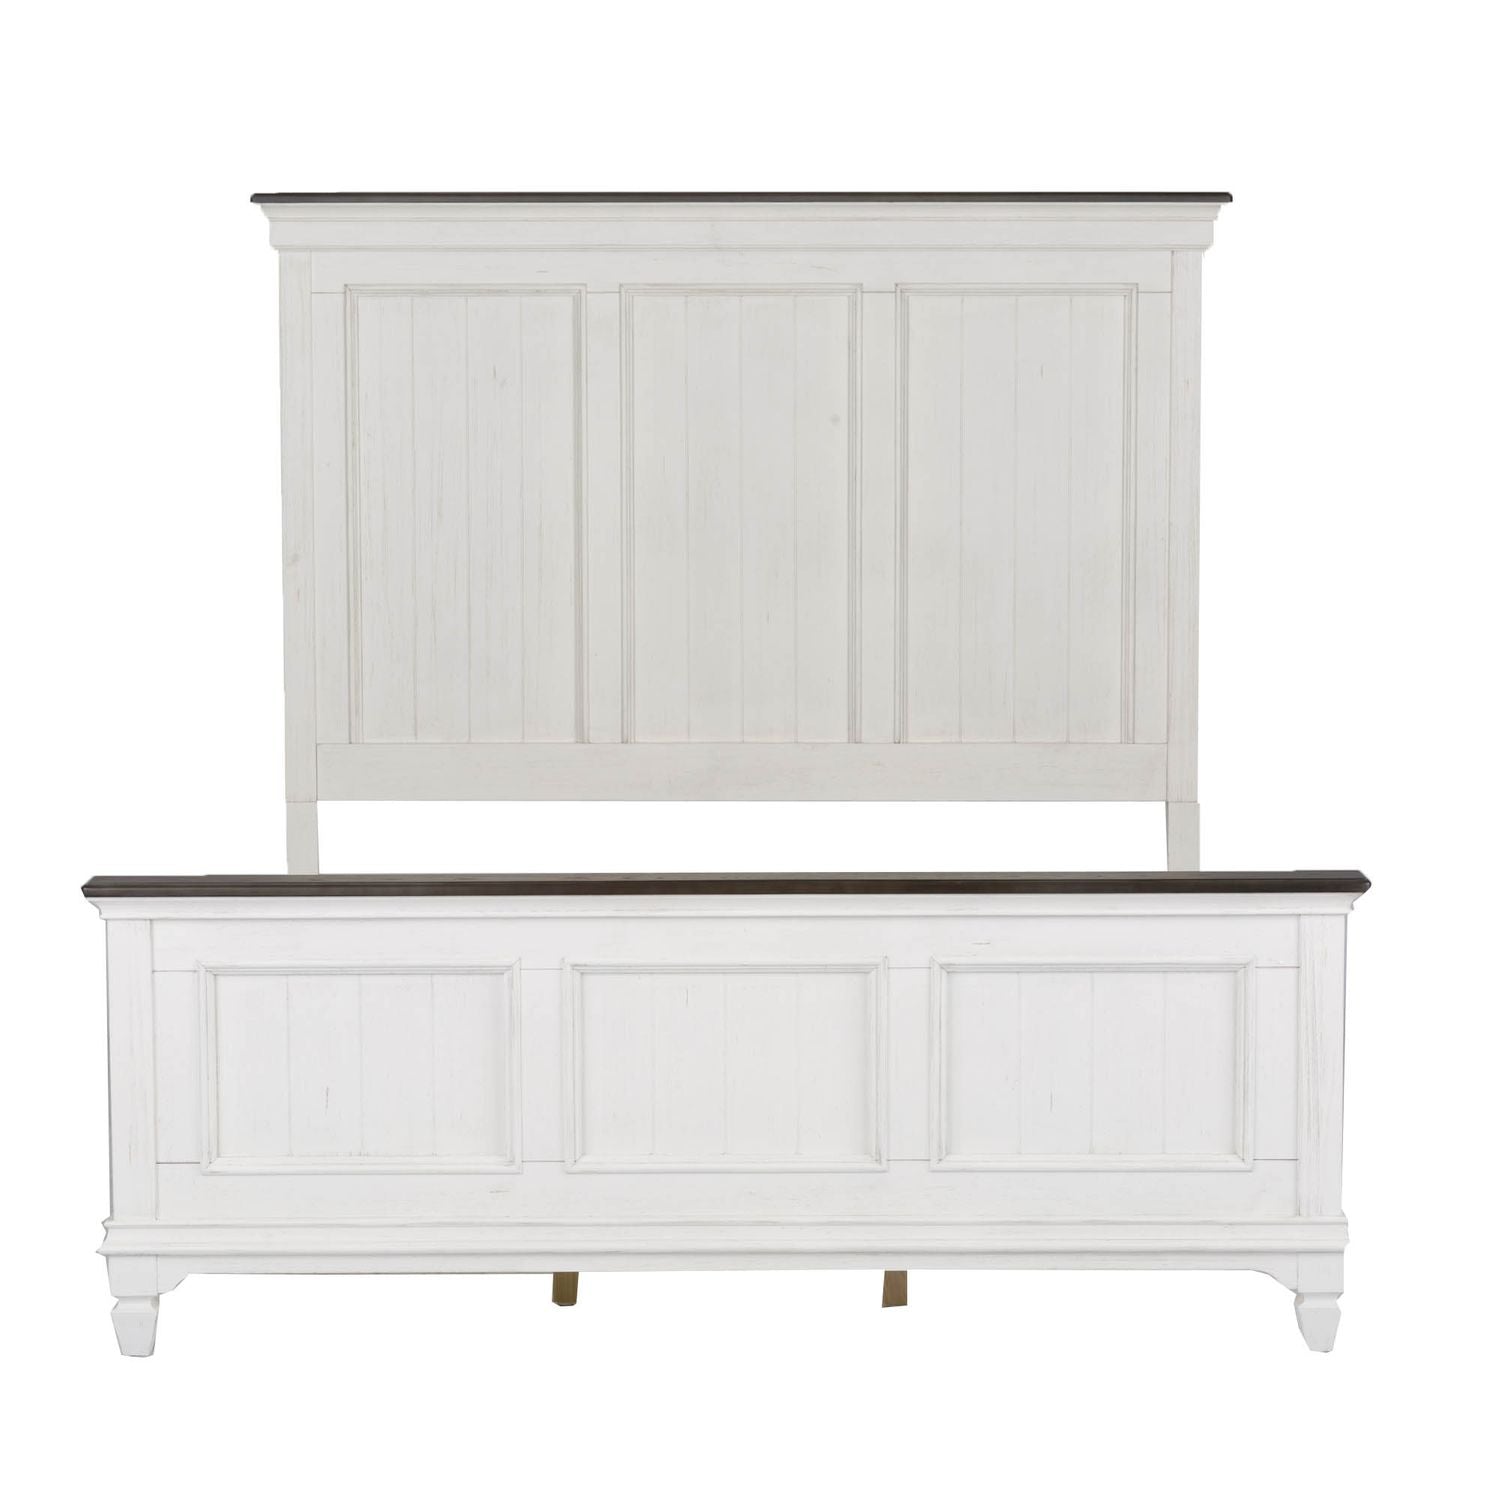 Allyson Park 417-BR Panel Bedroom Collection from Liberty Furniture